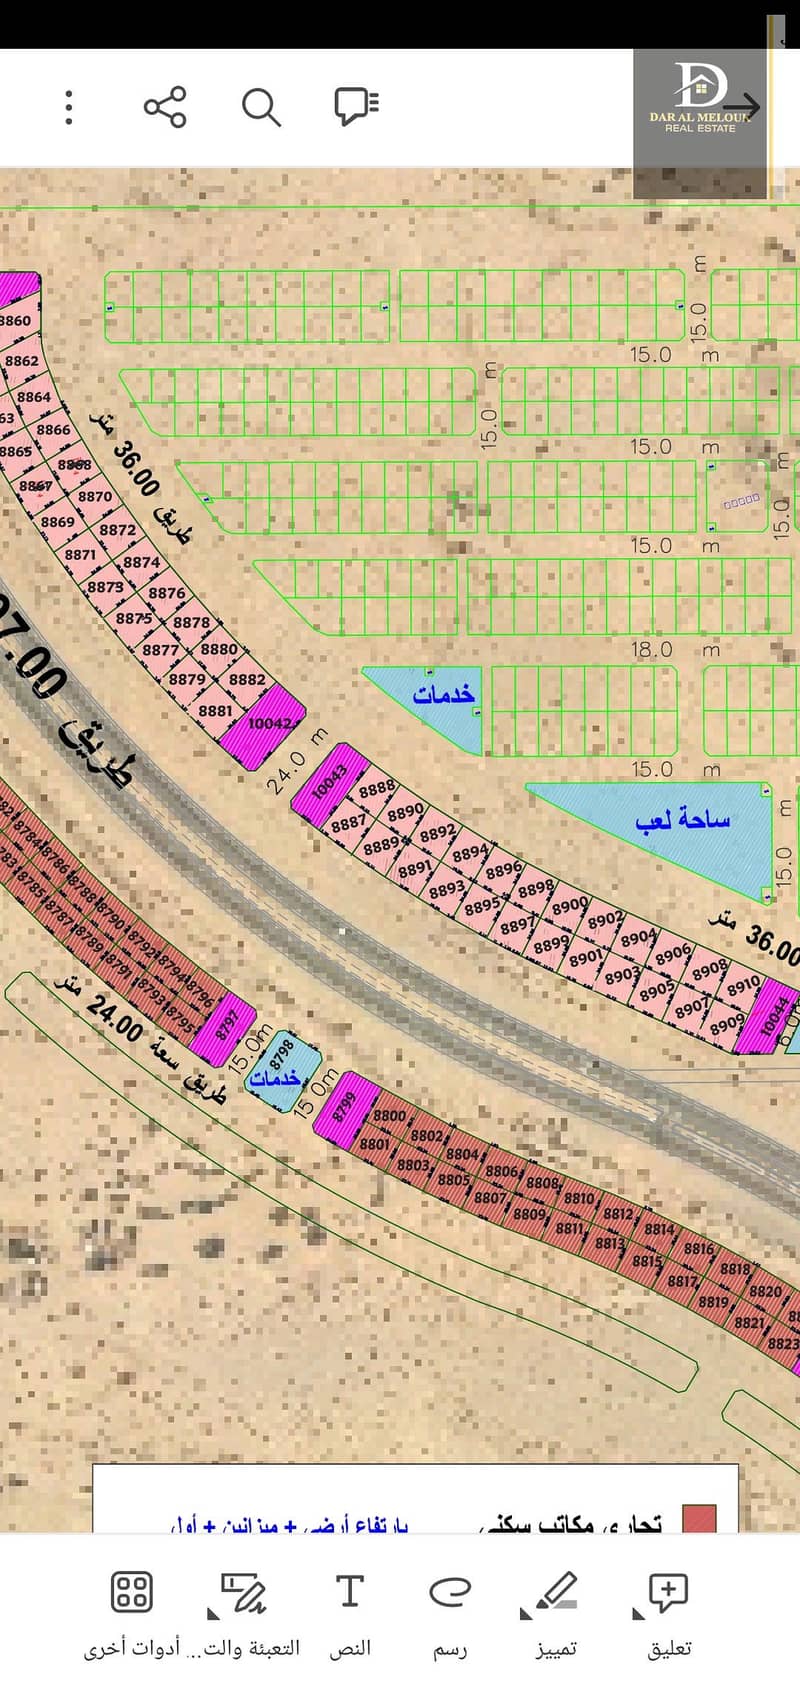 For sale in Sharjah, Muzaira’ah area, Al-Rahmaniyah suburb, commercial and residential land, area of ​​5,300 feet, ground permit, two storerooms, and the first, freehold installments completed, all Arab nationalities, towards Al-Rahmaniyah, intersection o